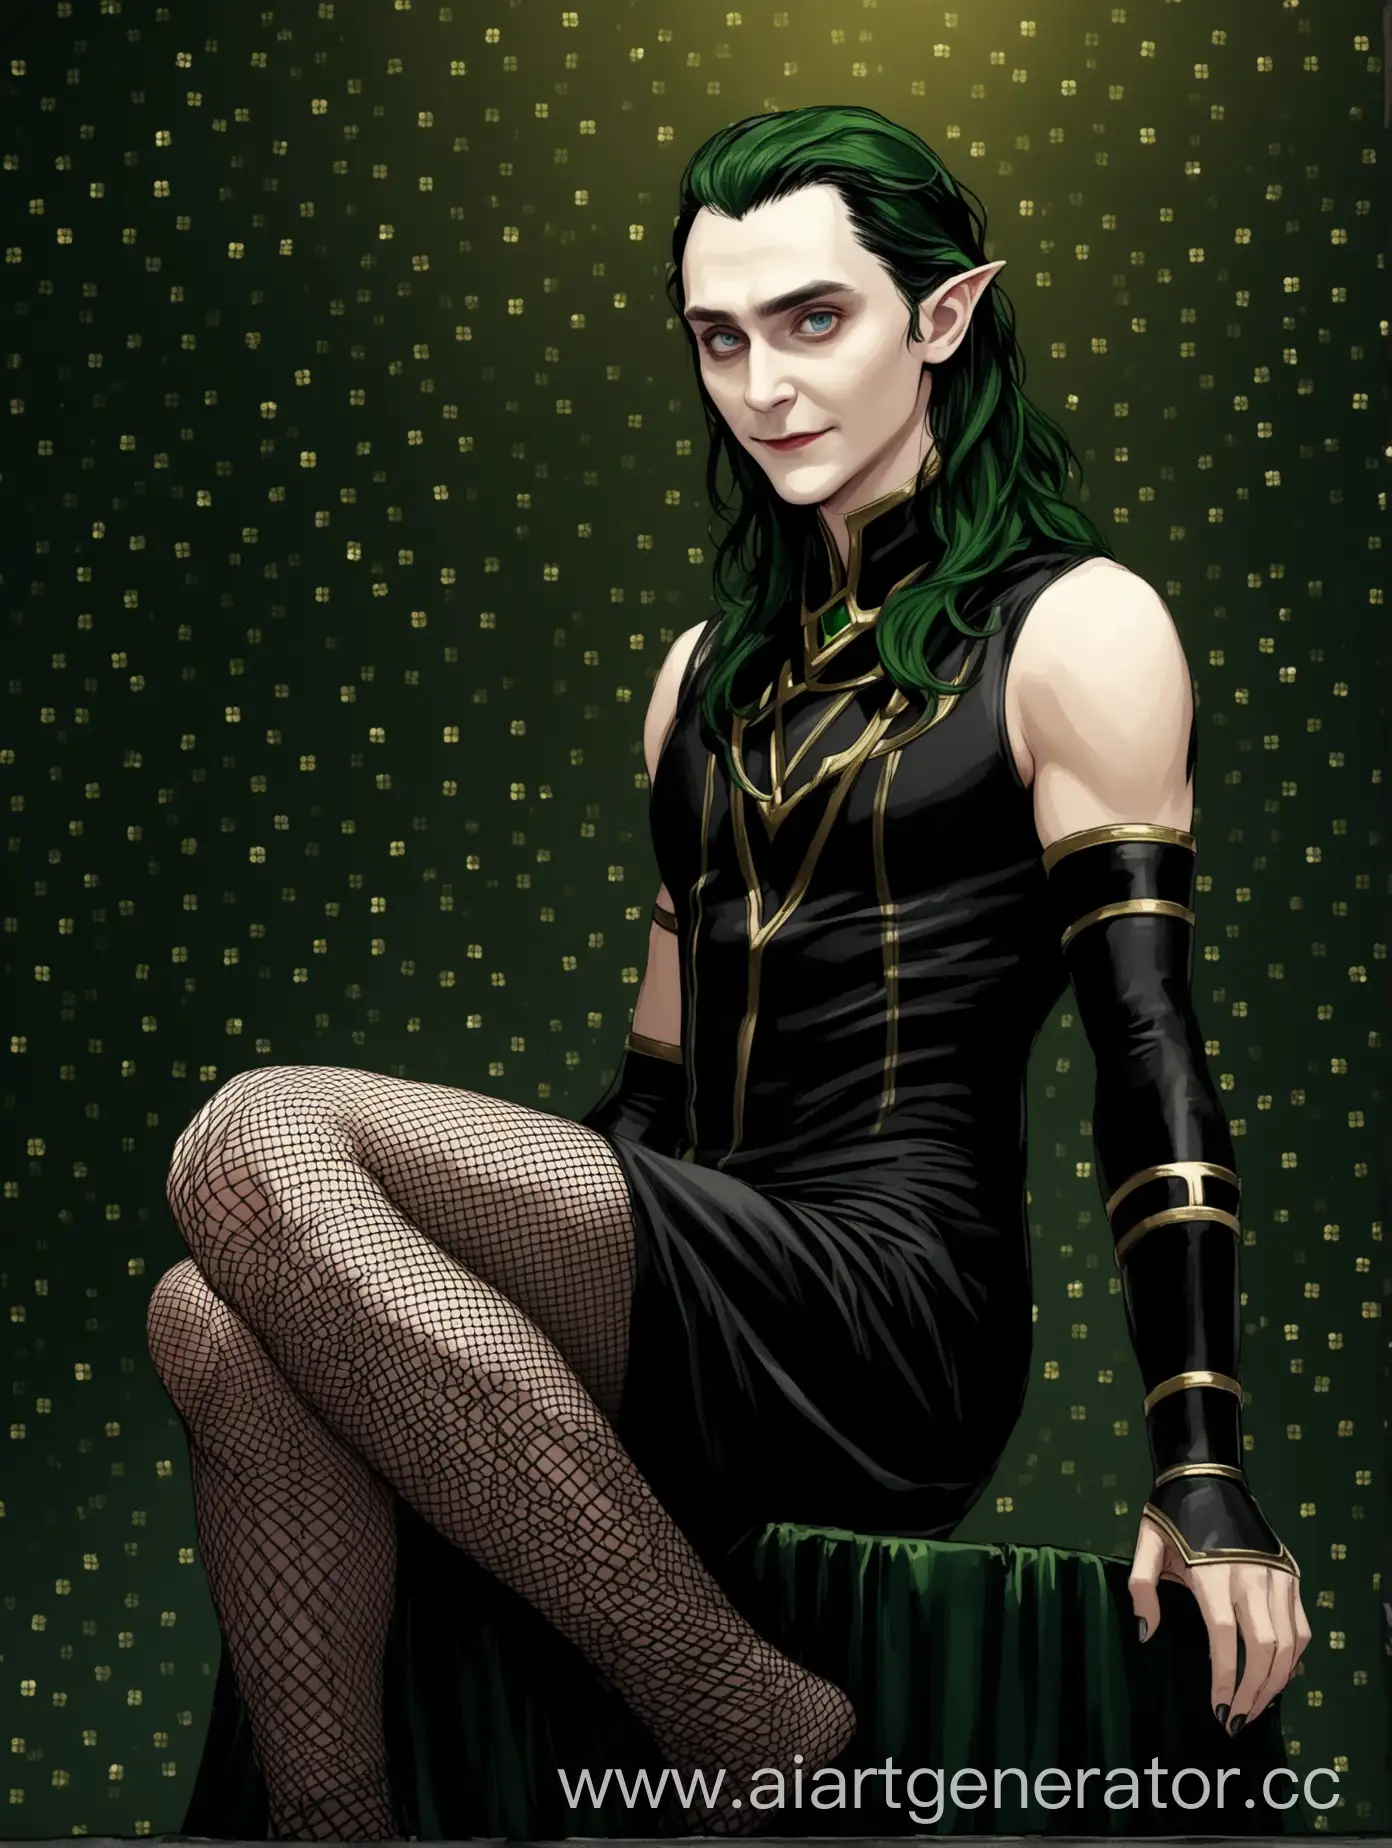 Loki-Cosplay-Mysterious-Figure-in-Black-Dress-and-Fishnet-Tights